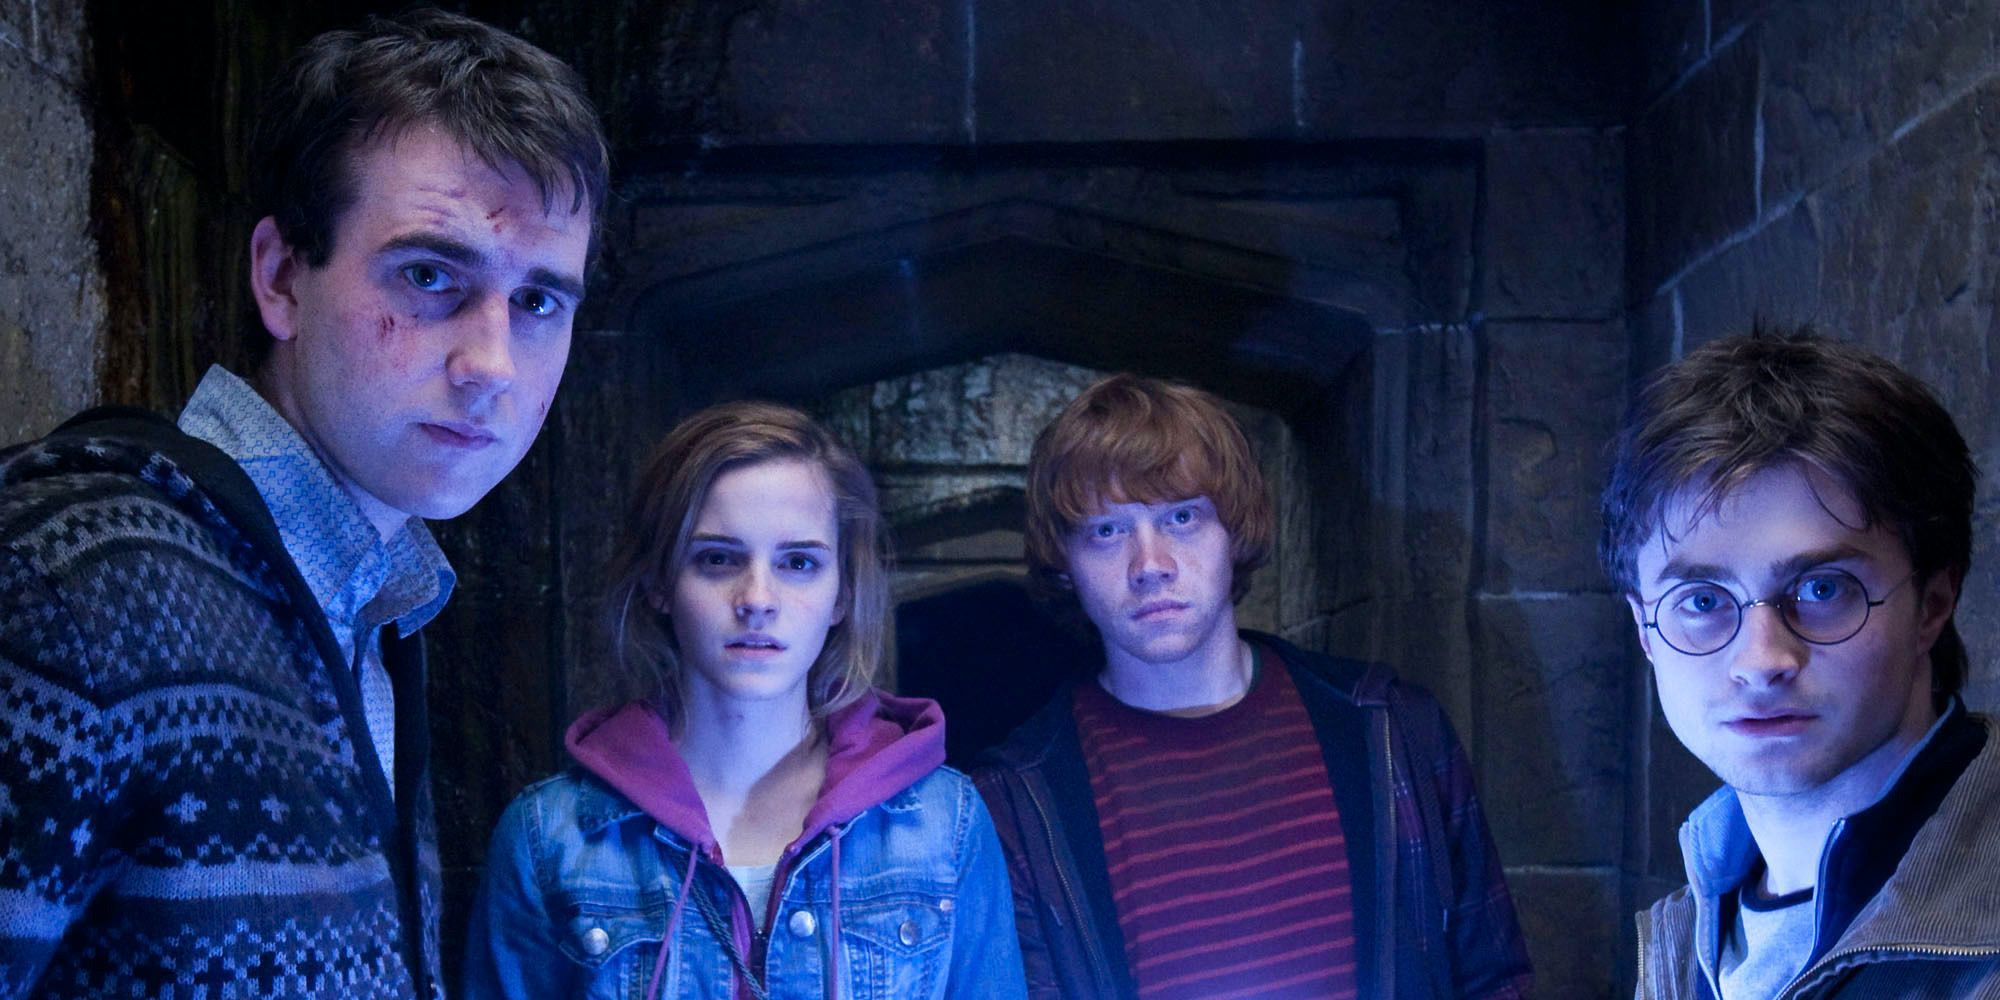 Harry Potter and the Deathly Hallows Part 2 Neville leads Hermione, Ron, and Harry down the secret passage to the Room of Requirement